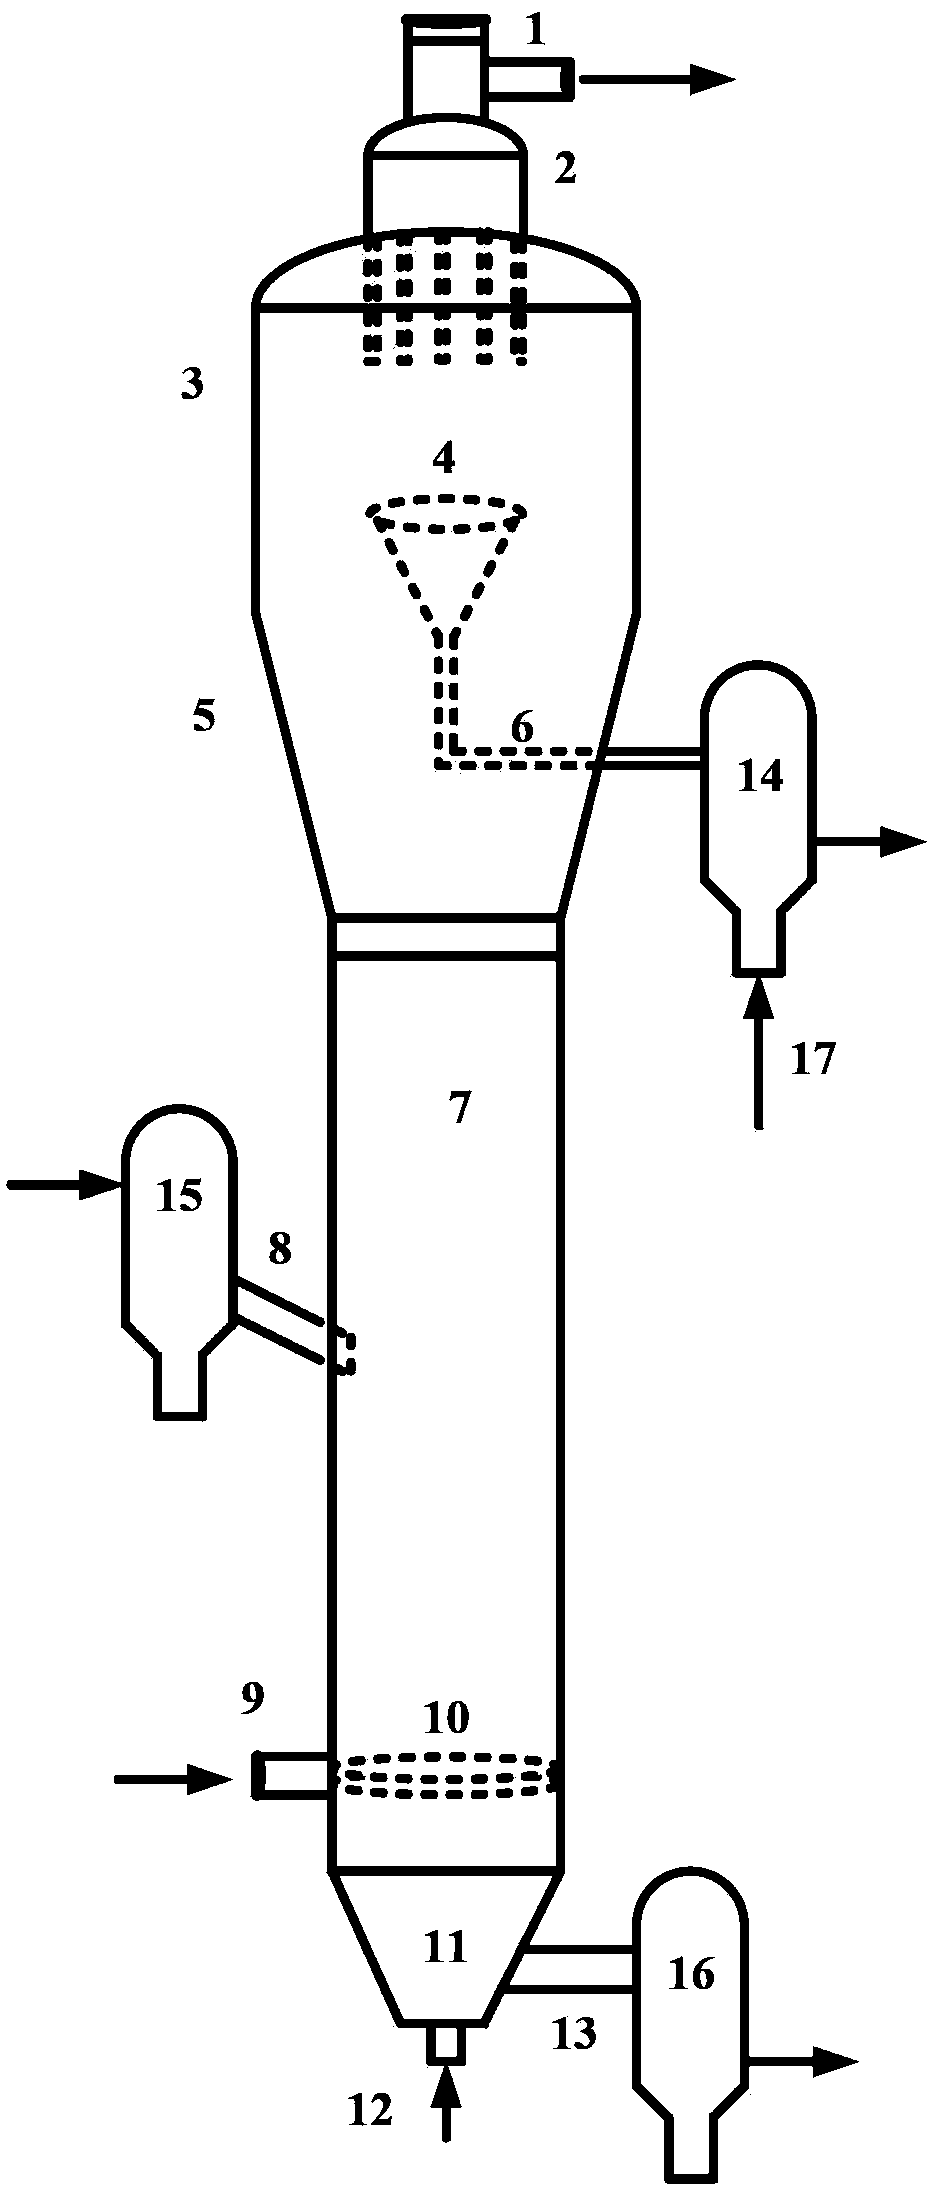 Fluidized bed reactor applied to adsorption desulfurization and application thereof